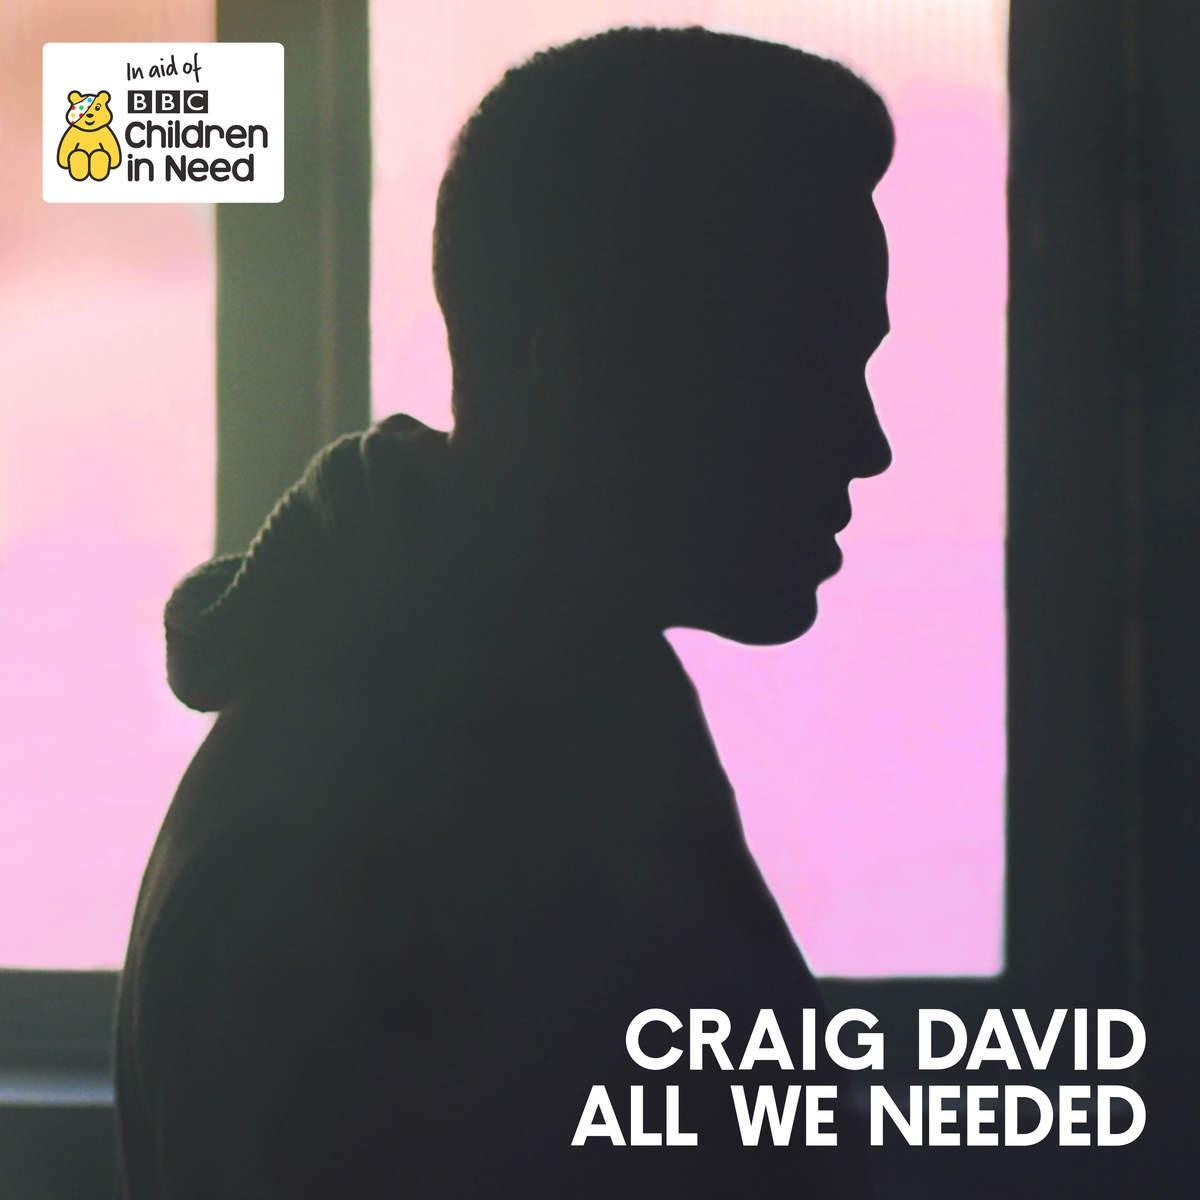 All We Needed (Official BBC Children in Need Single 2016)